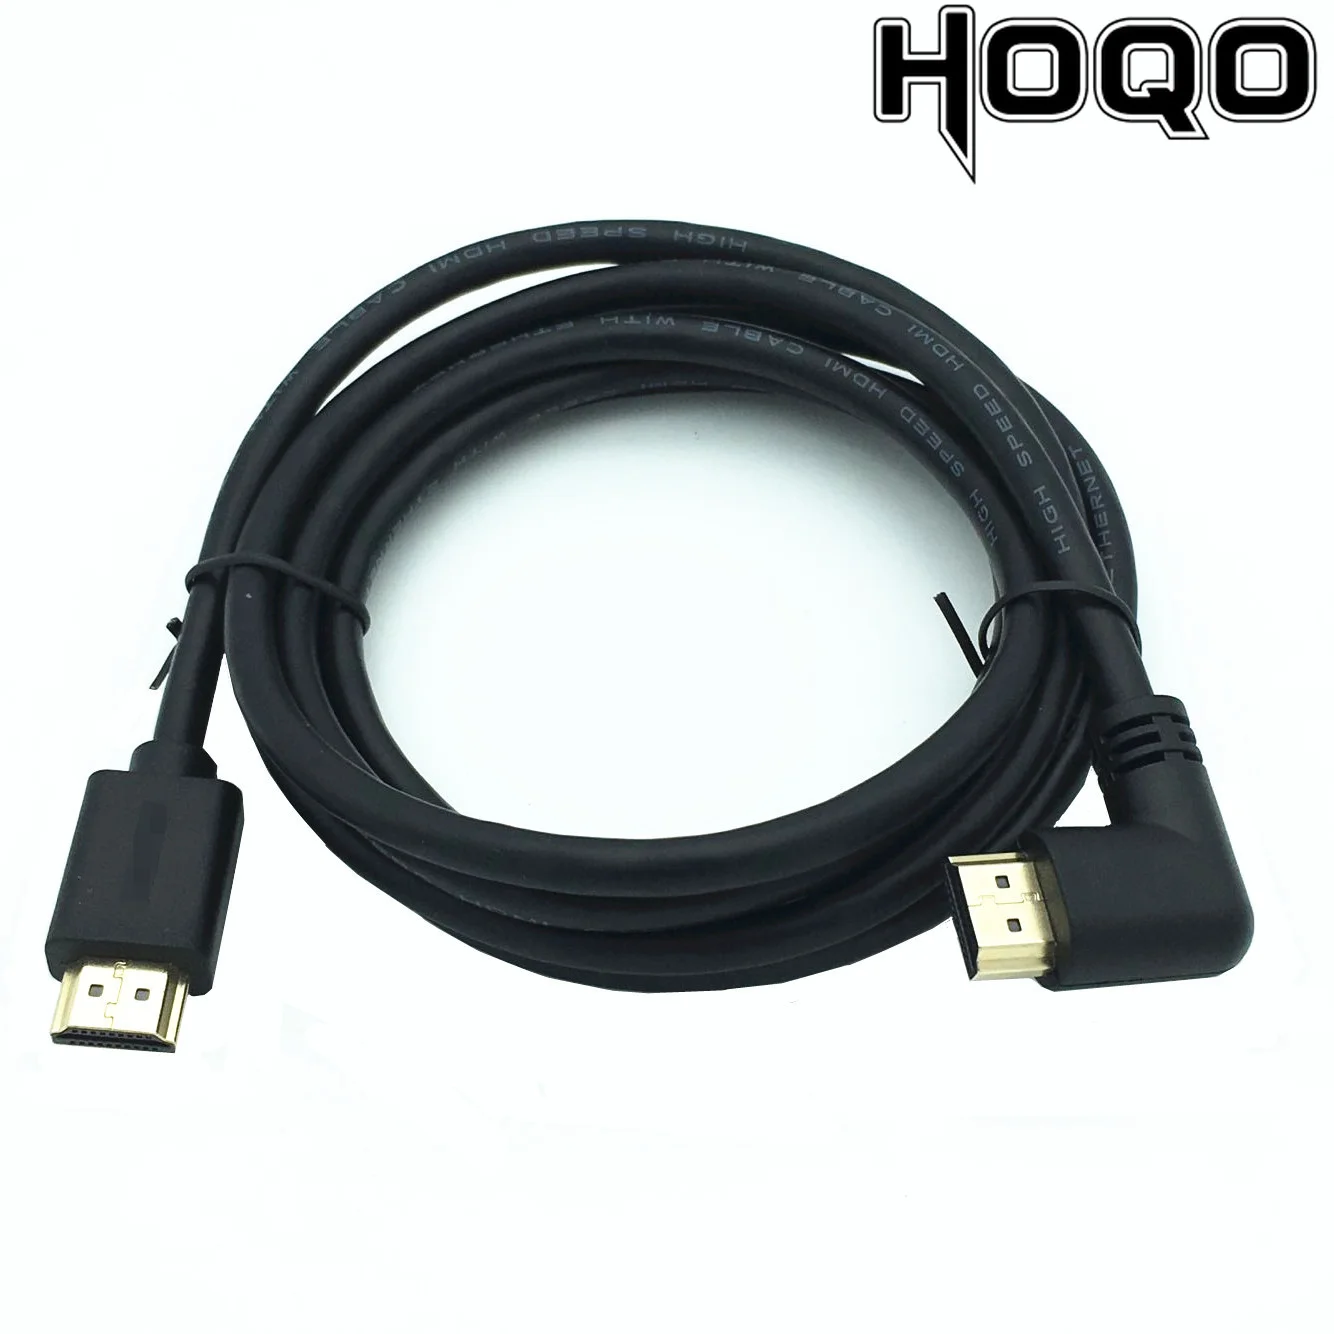 

4K*2K 60HZ version 2.0 HDMI-compatible HD cable brain TV connection data cable straight to up down angle 1.8m